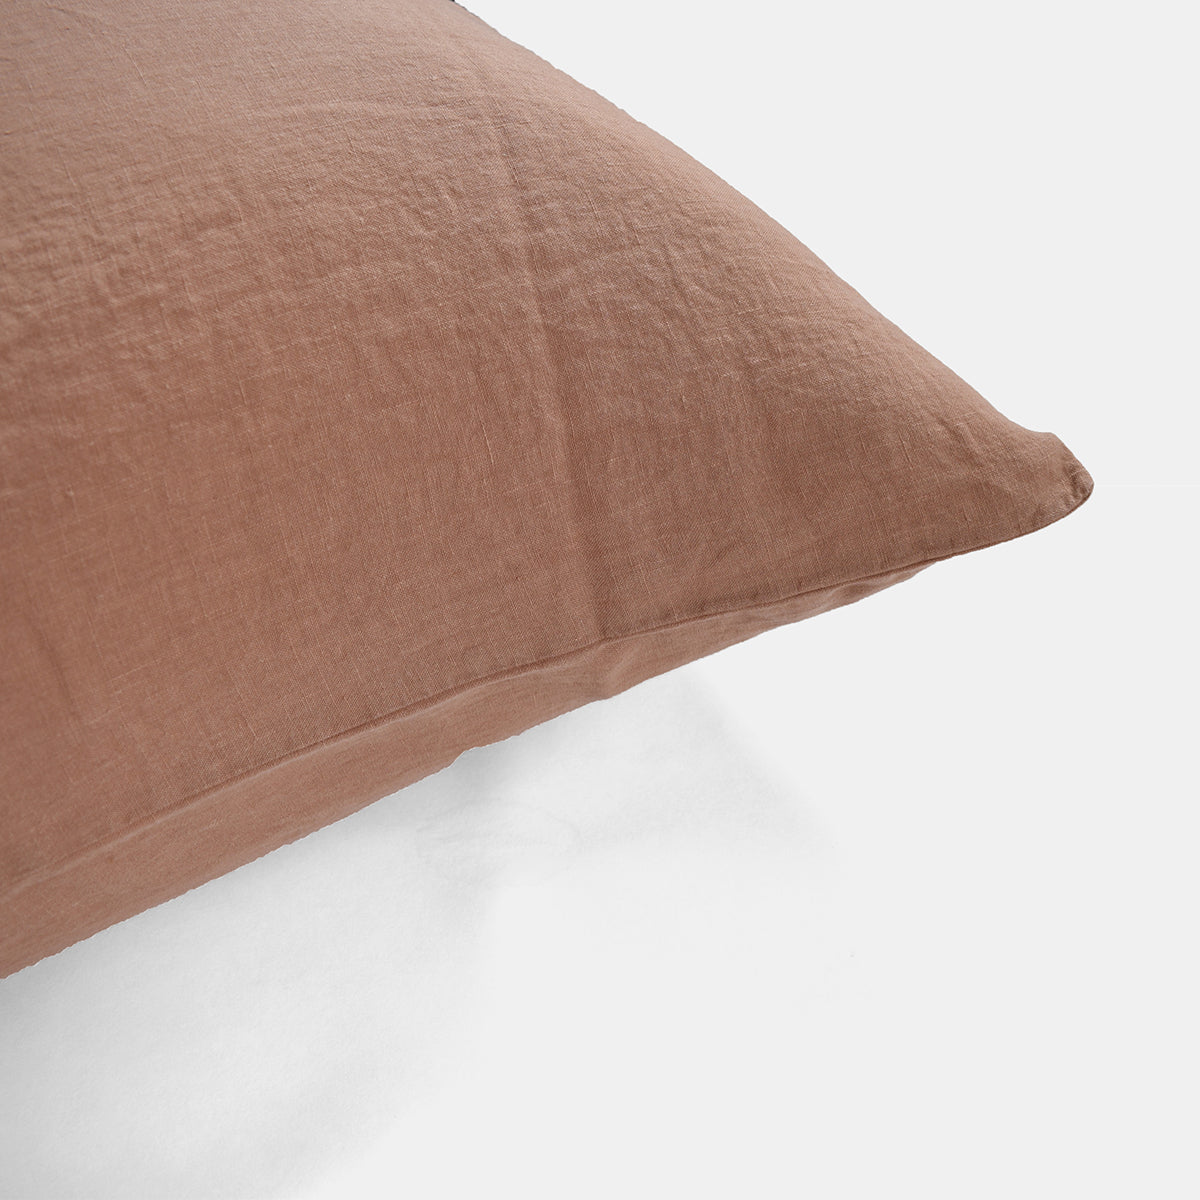 Linge Particulier Moka Standard Linen Pillowcase Sham for a colorful linen bedding look in earthy clay pink - Collyer&#39;s Mansion